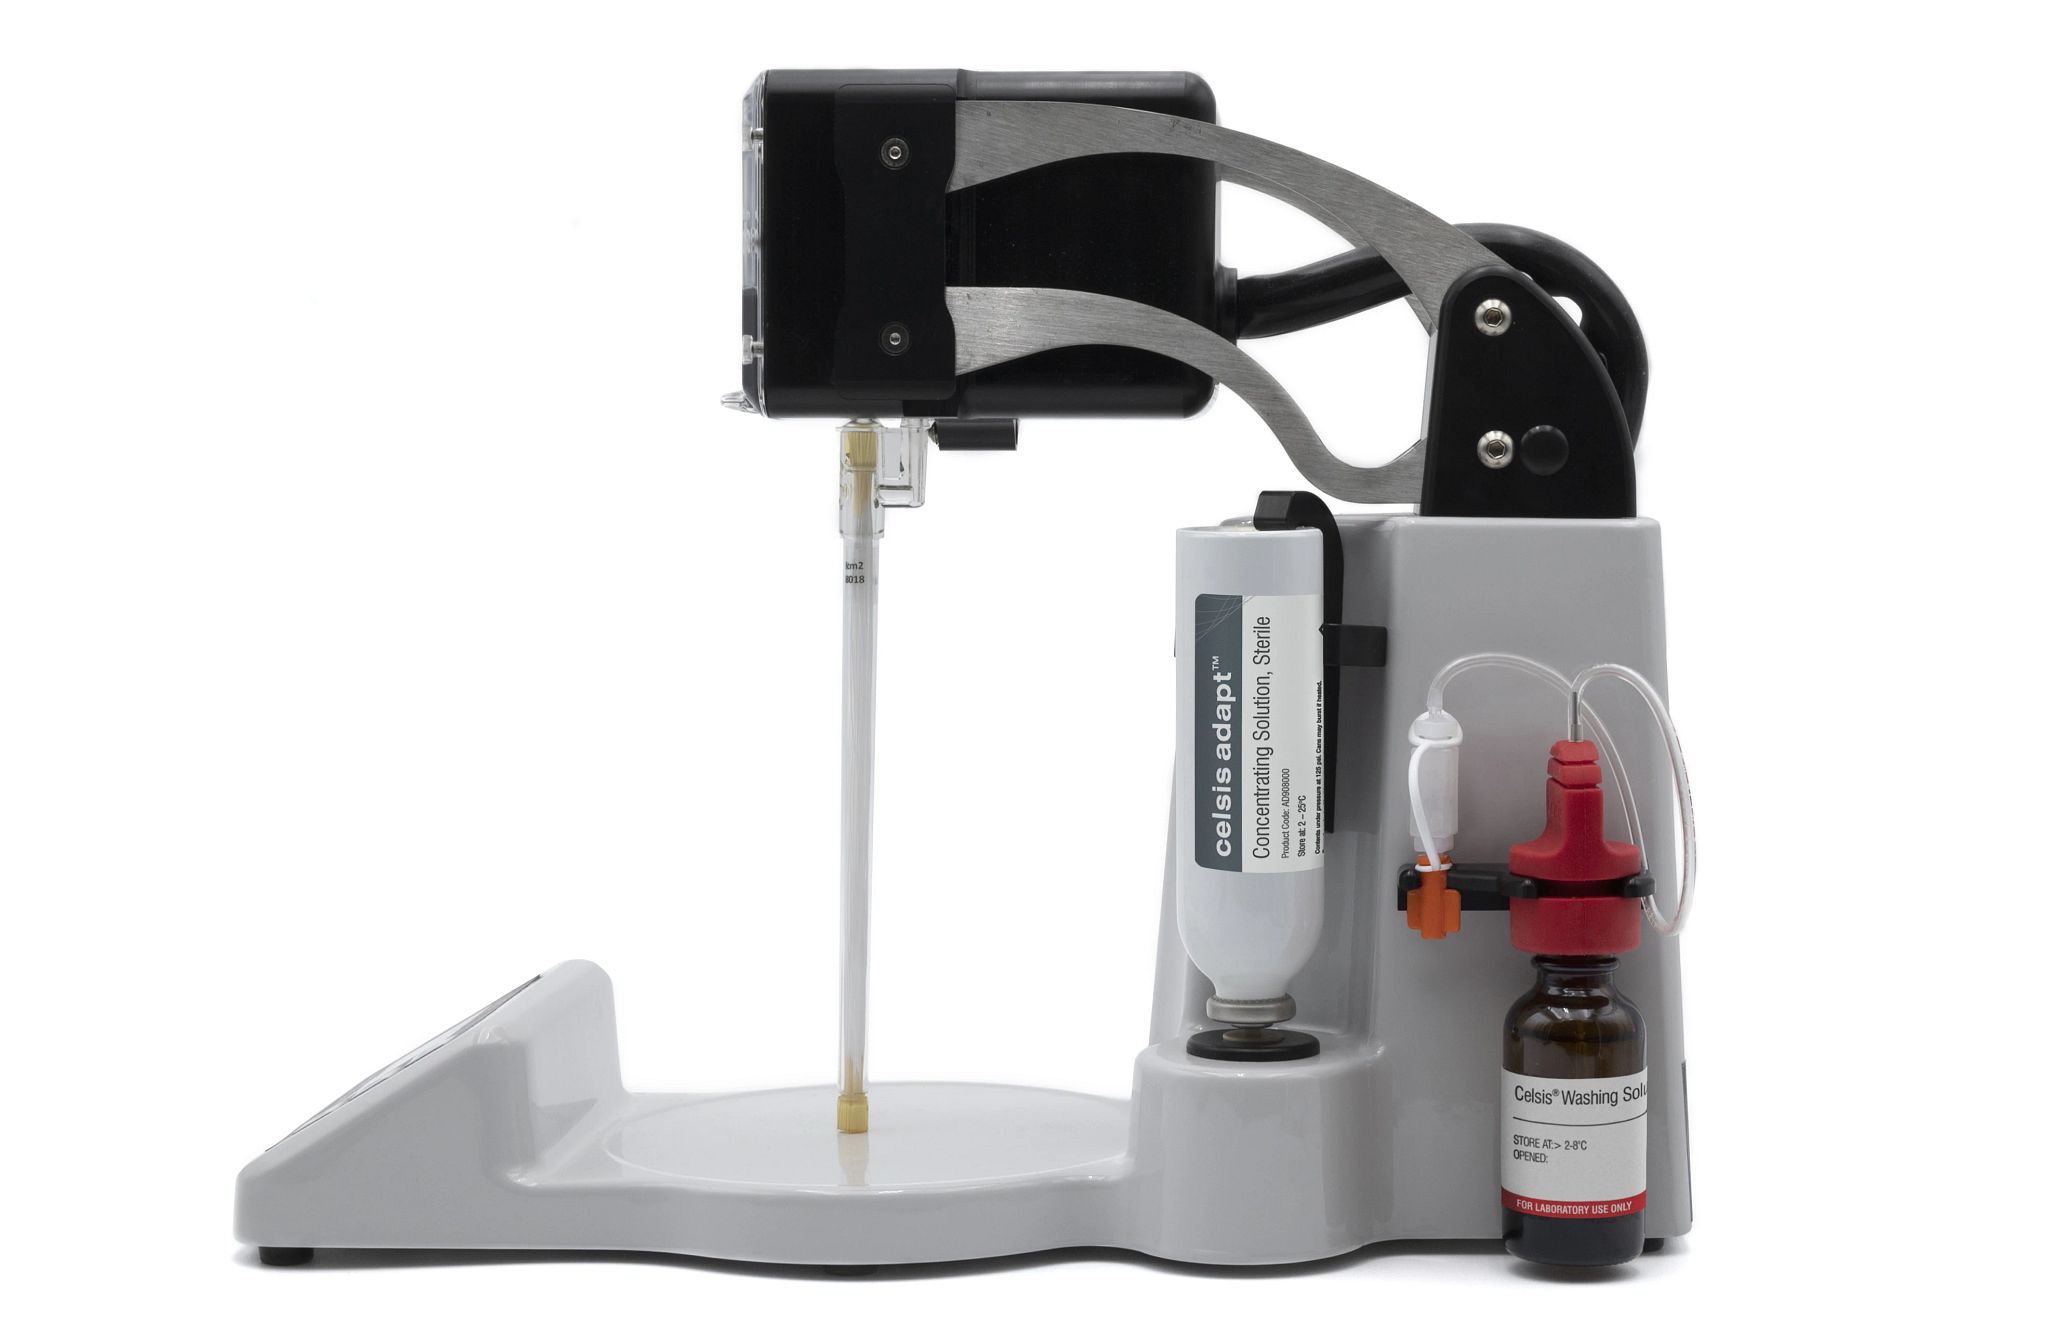 The Celsis Adapt™ is a sample concentrator used to help test biotech and consumer care products, preparing them for rapid microbial detection using Celsis ATP bioluminescence rapid microbiological detection.